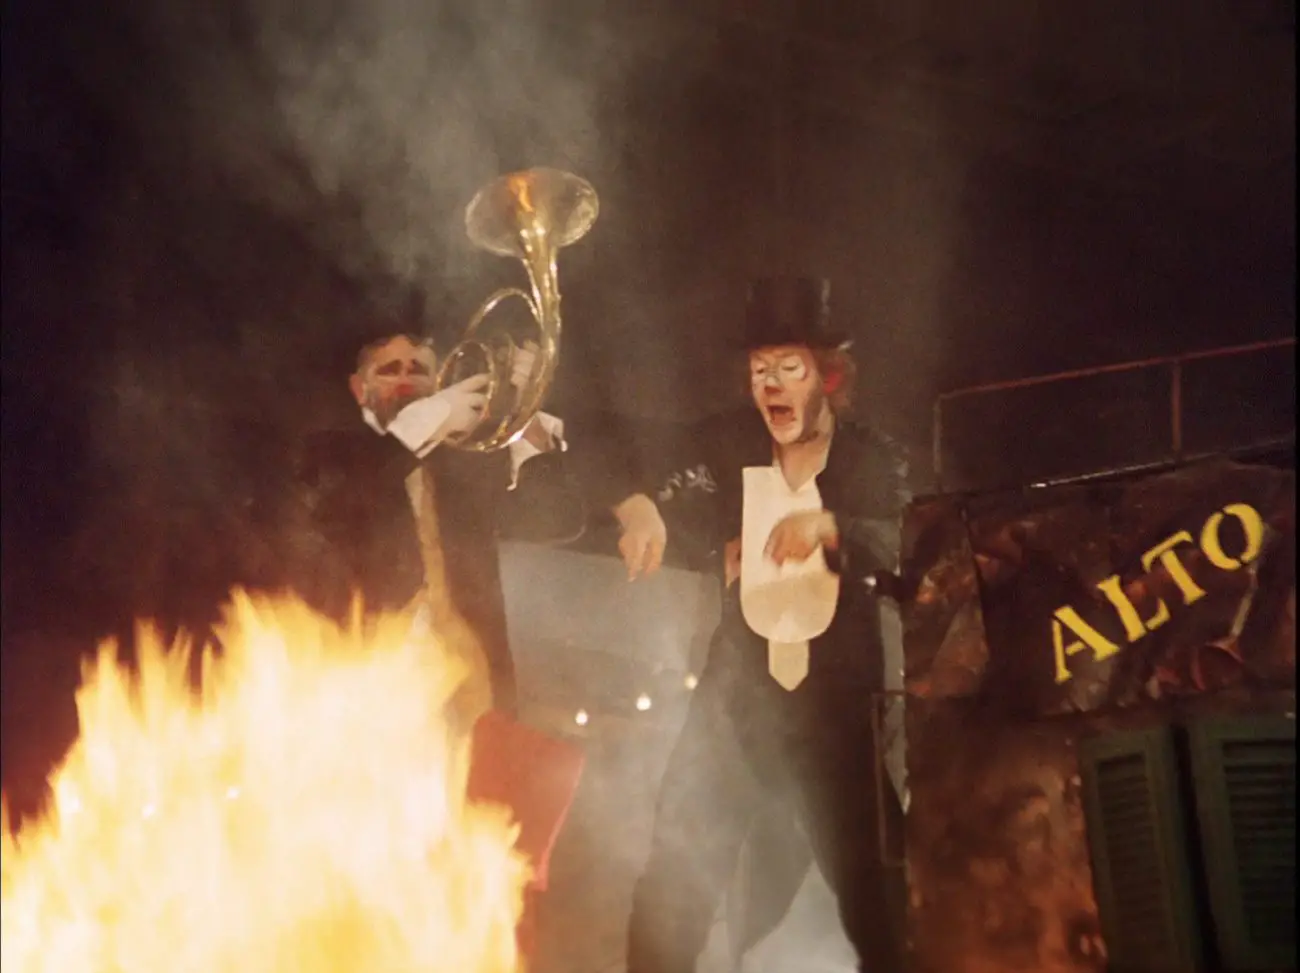 Two clowns standing in front of a fire, one holding a musical instrument